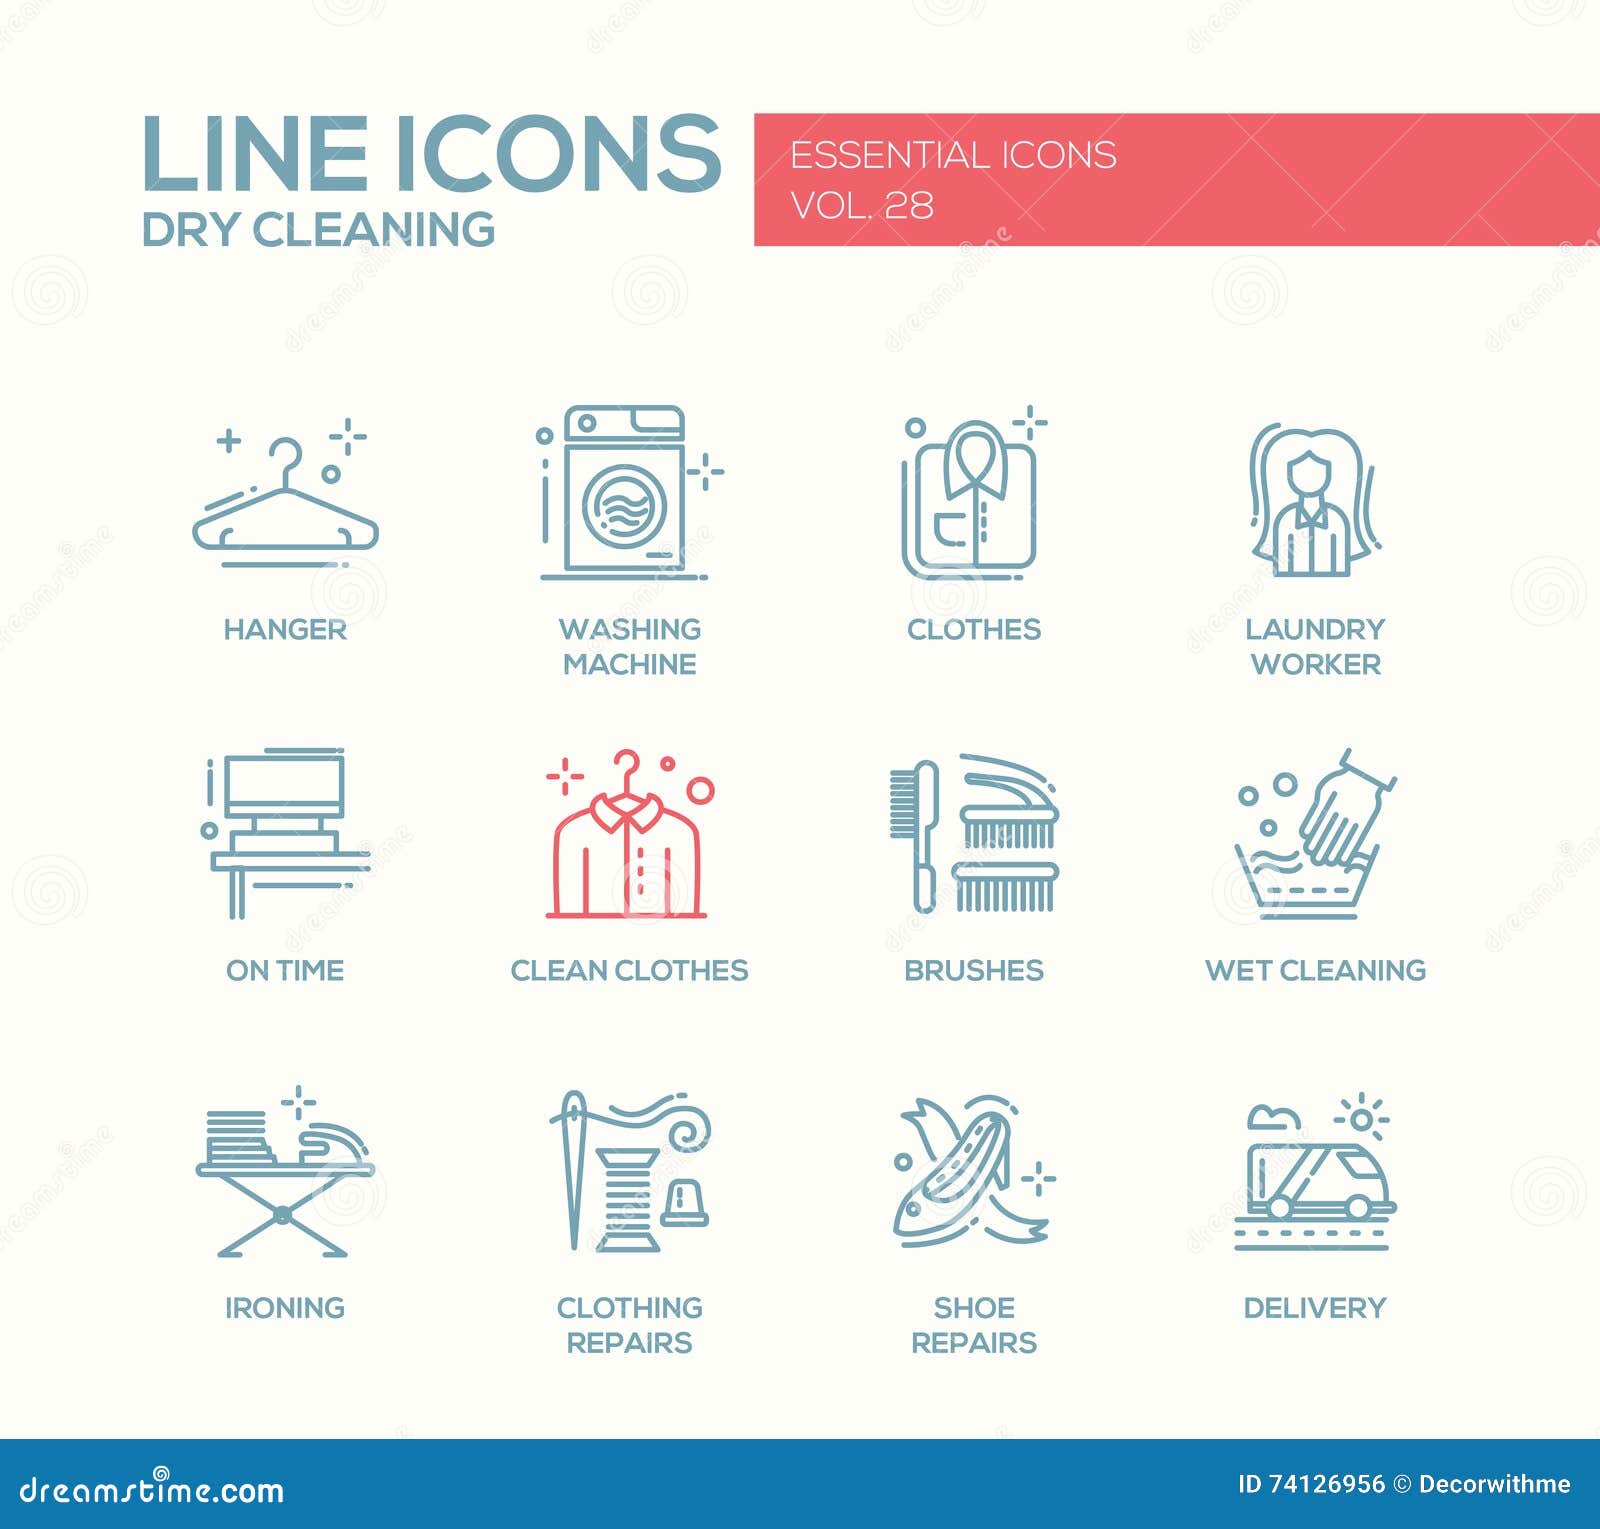 Laundry Line Design Icons Set Stock Vector Illustration Of Laundry Collection